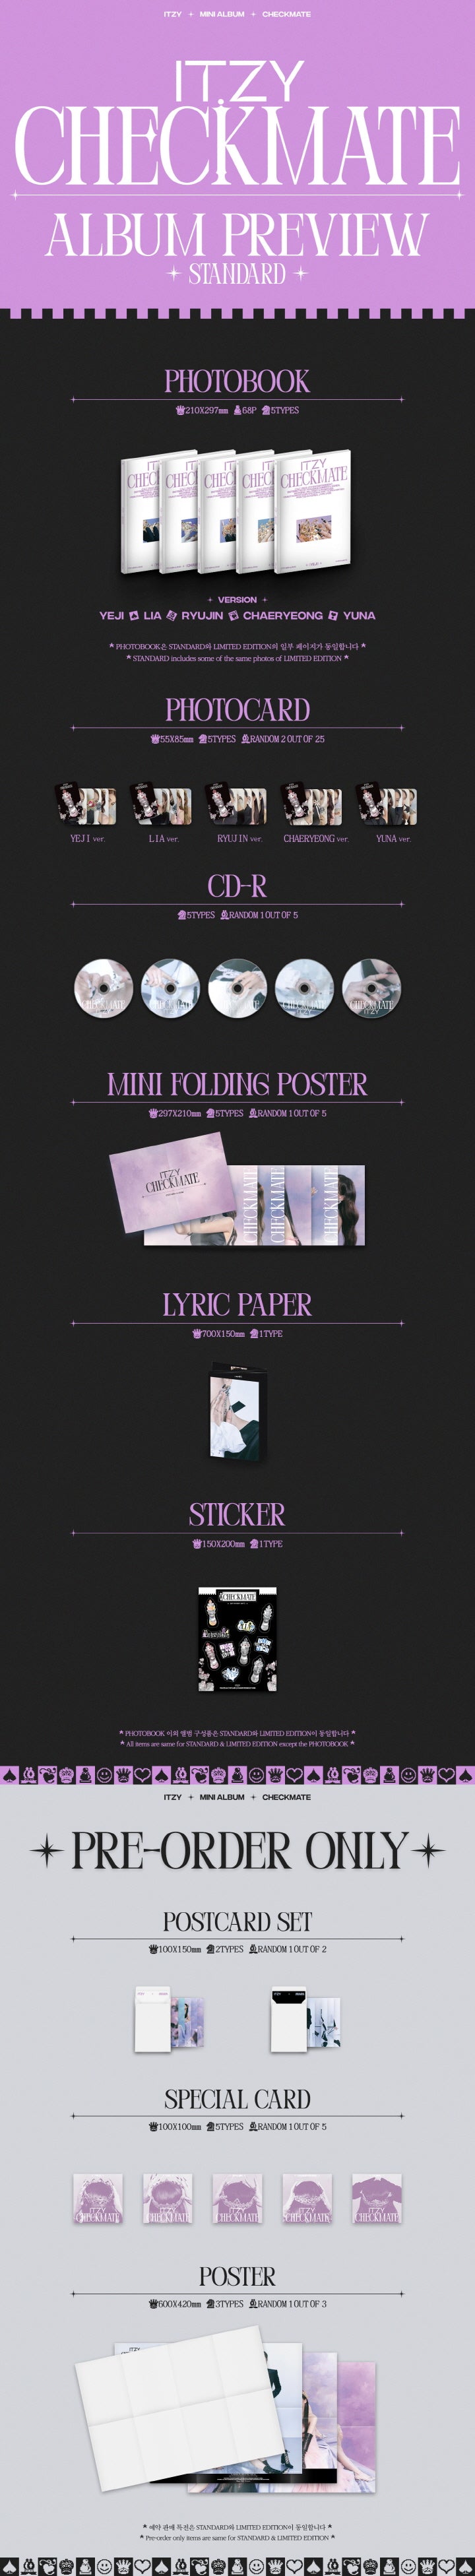 1 CD
1 Photo Book (68 pages)
2 Photo Cards (random out of 25 types)
1 Mini Folding Poster (random out of 5 types)
1 Lyric ...